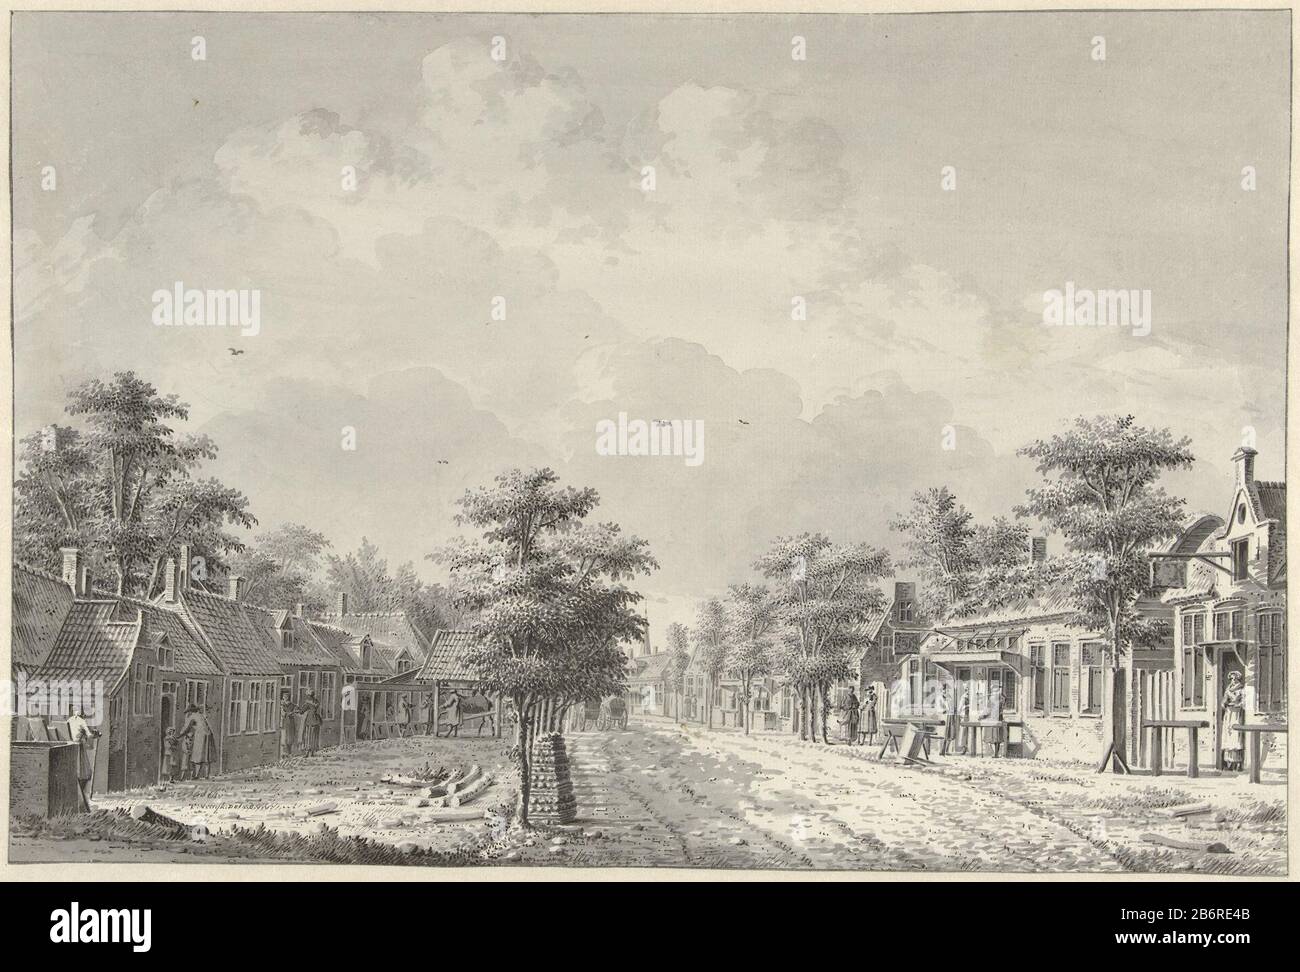 Gezicht op het dorp De Bilt vanaf de Hollebeld View of the village from De Bilt Called Hollow Property Type: Drawing Object number: RP-T-1928-103 Inscriptions / Brands: signature recto bottom left: 'T. Verryk del. ad. viv'opschrift, verso: 'sight village see the Bild of Hollow Called to / half hour geleege the city Utrecht' Manufacturer : artist: Dirk Enrich (listed building) Dated: 1744 - 1786 Physical features: Brush in black, gray and white, pen in gray and black material: paper ink Technique: brush / pen Dimensions: h 265 mm × W 393 mm Subject: public road in village reversals or cities an Stock Photo